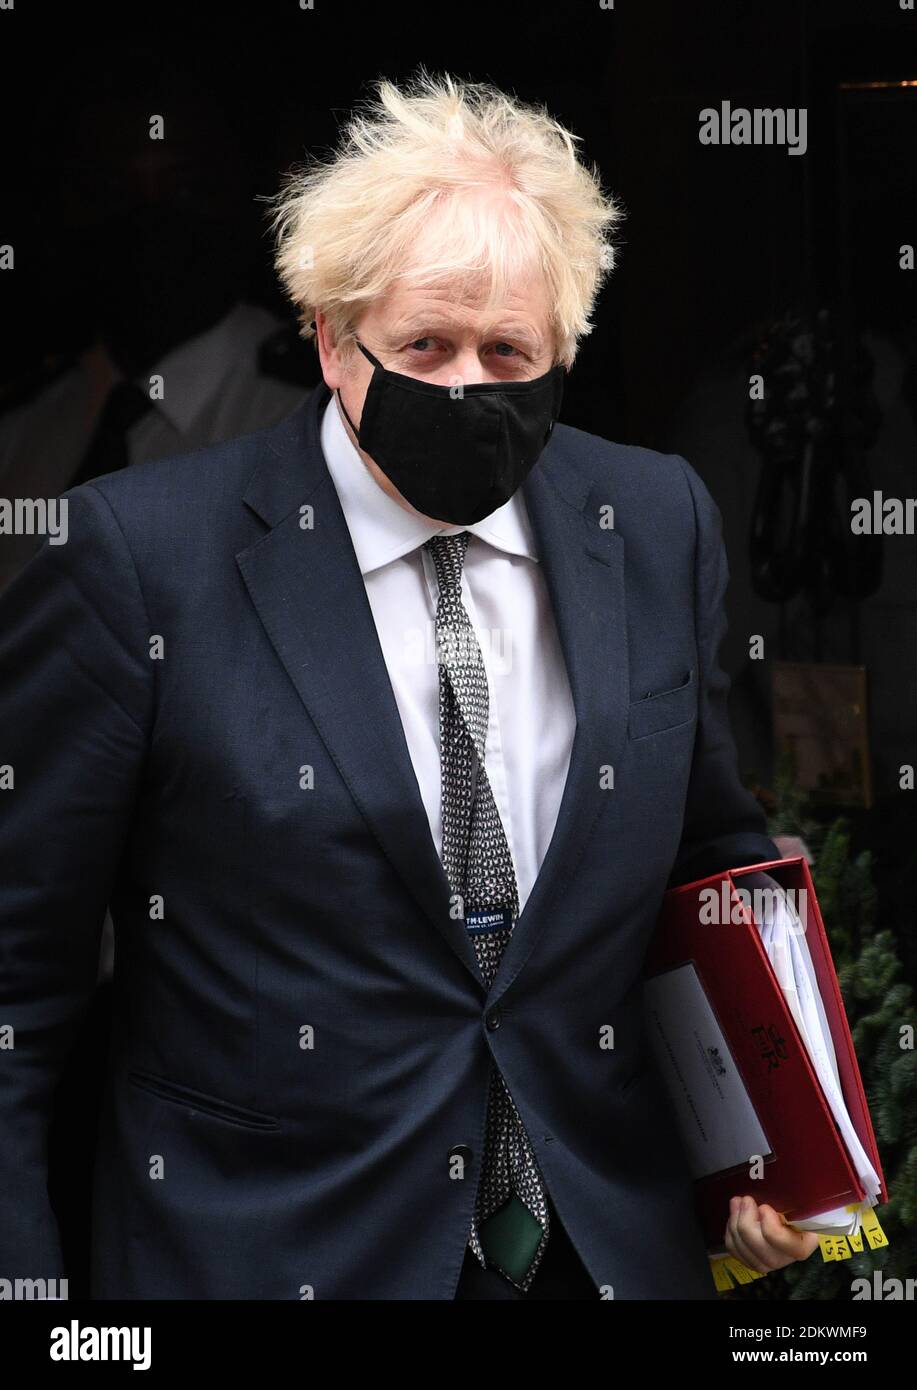 Prime Minister Boris Johnson leaves 10 Downing Street to attend Prime Minister's Questions at the Houses of Parliament, London. Stock Photo